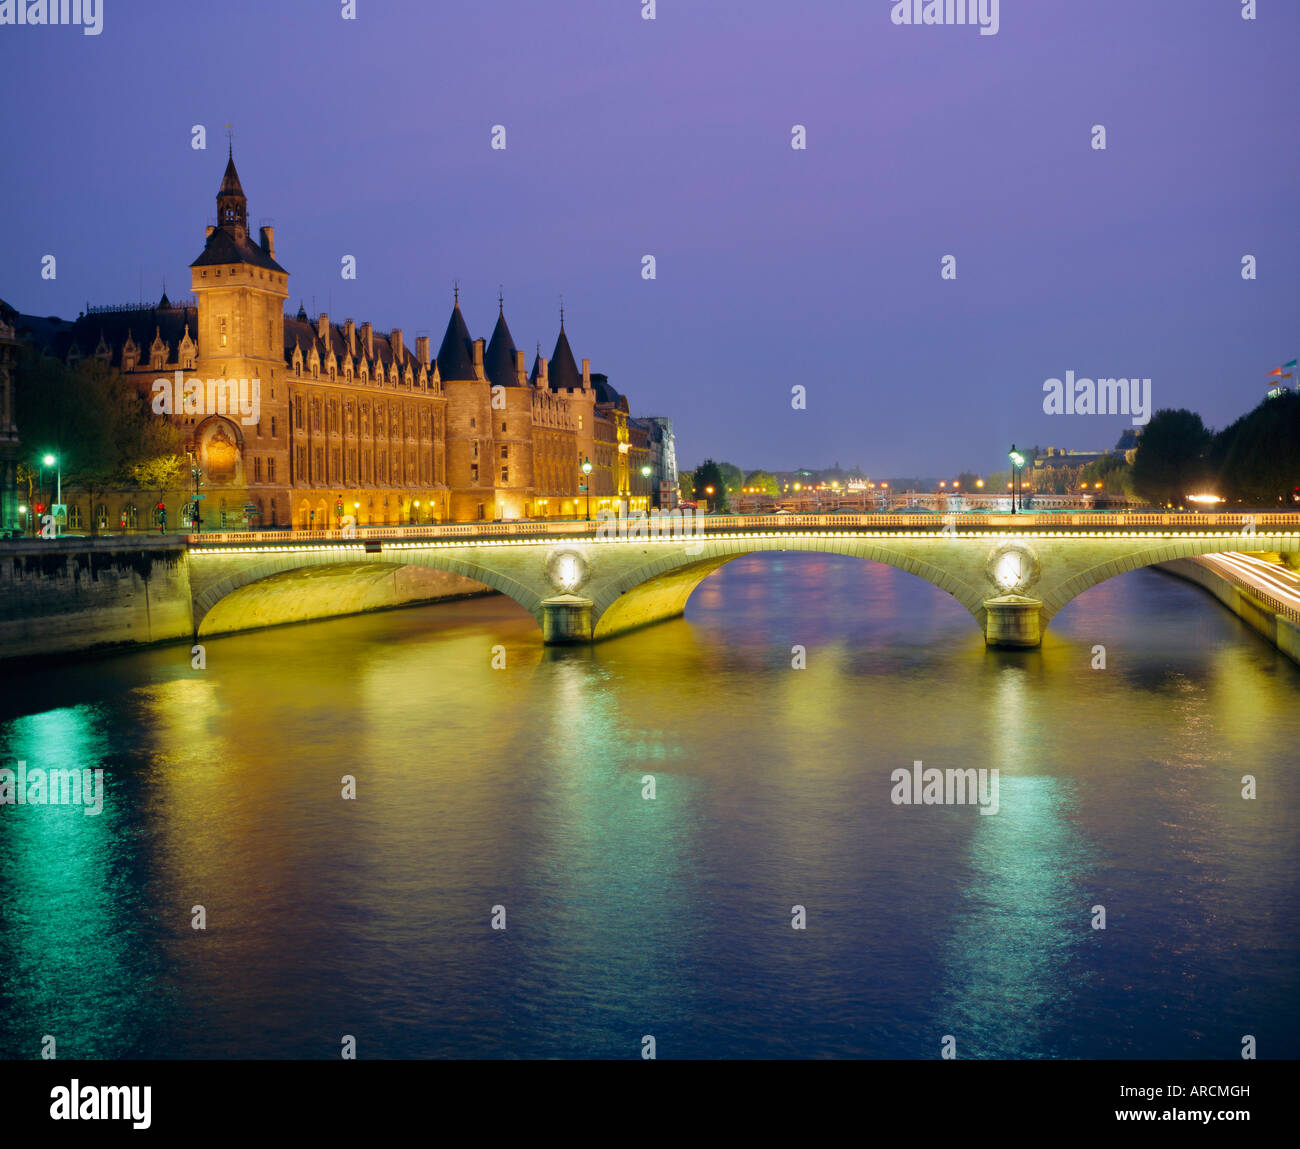 Palais de Justice and the River Seine in the evening, Paris, France, Europe Stock Photo